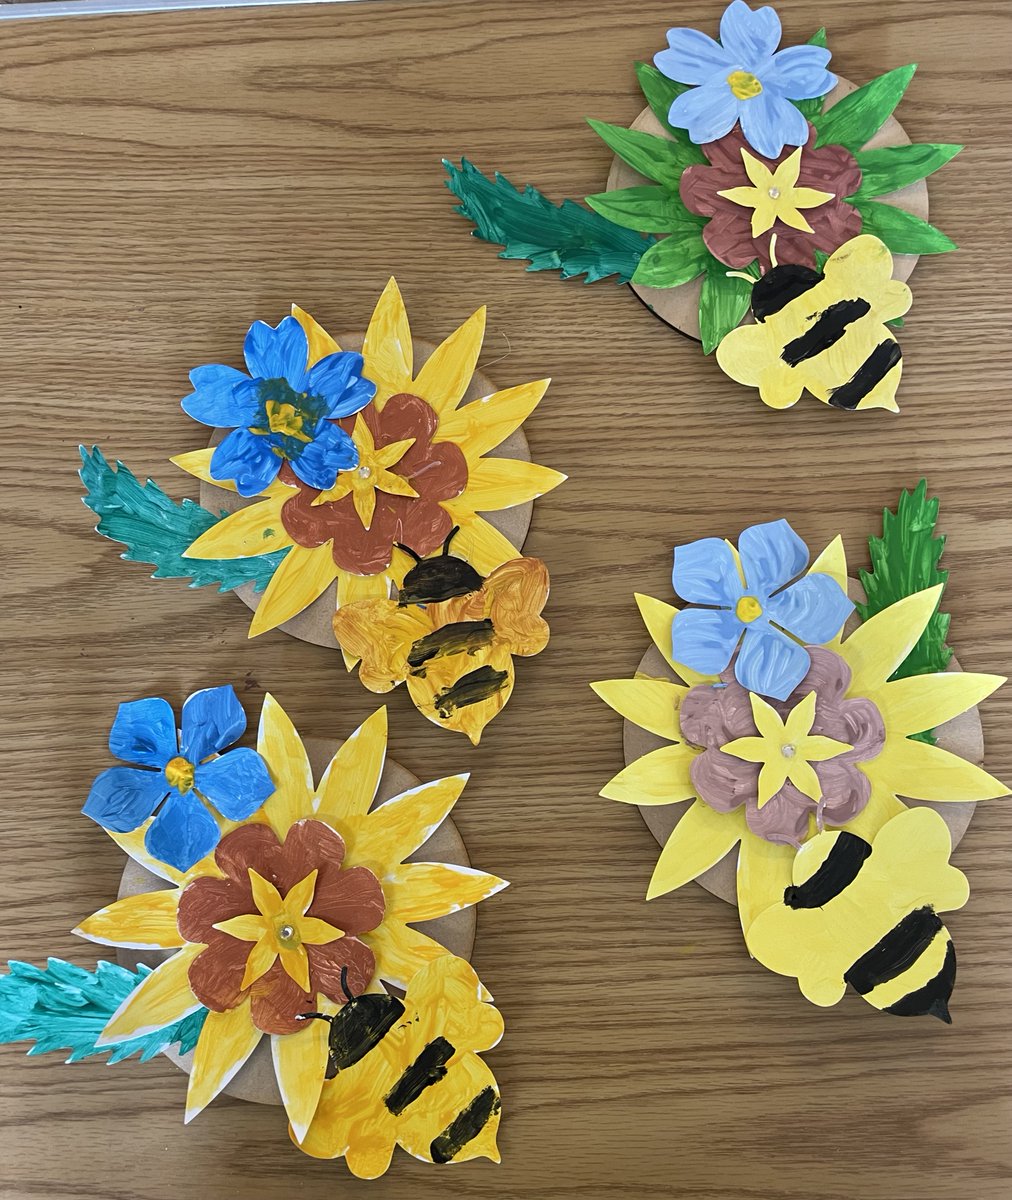 Fab morning at #CoundonCareSeniorsClub #Coventry, painting @creativemojo🌻Sunflowers🐝Bumble Bees for #WorldBeeDay 20May & a #ForgetMeNot for #DementiaActionWeek 13-19 May. With 25 Club regulars taking part, we had a really busy morning🥰 @DementiaFriends #DementiaCafe #community